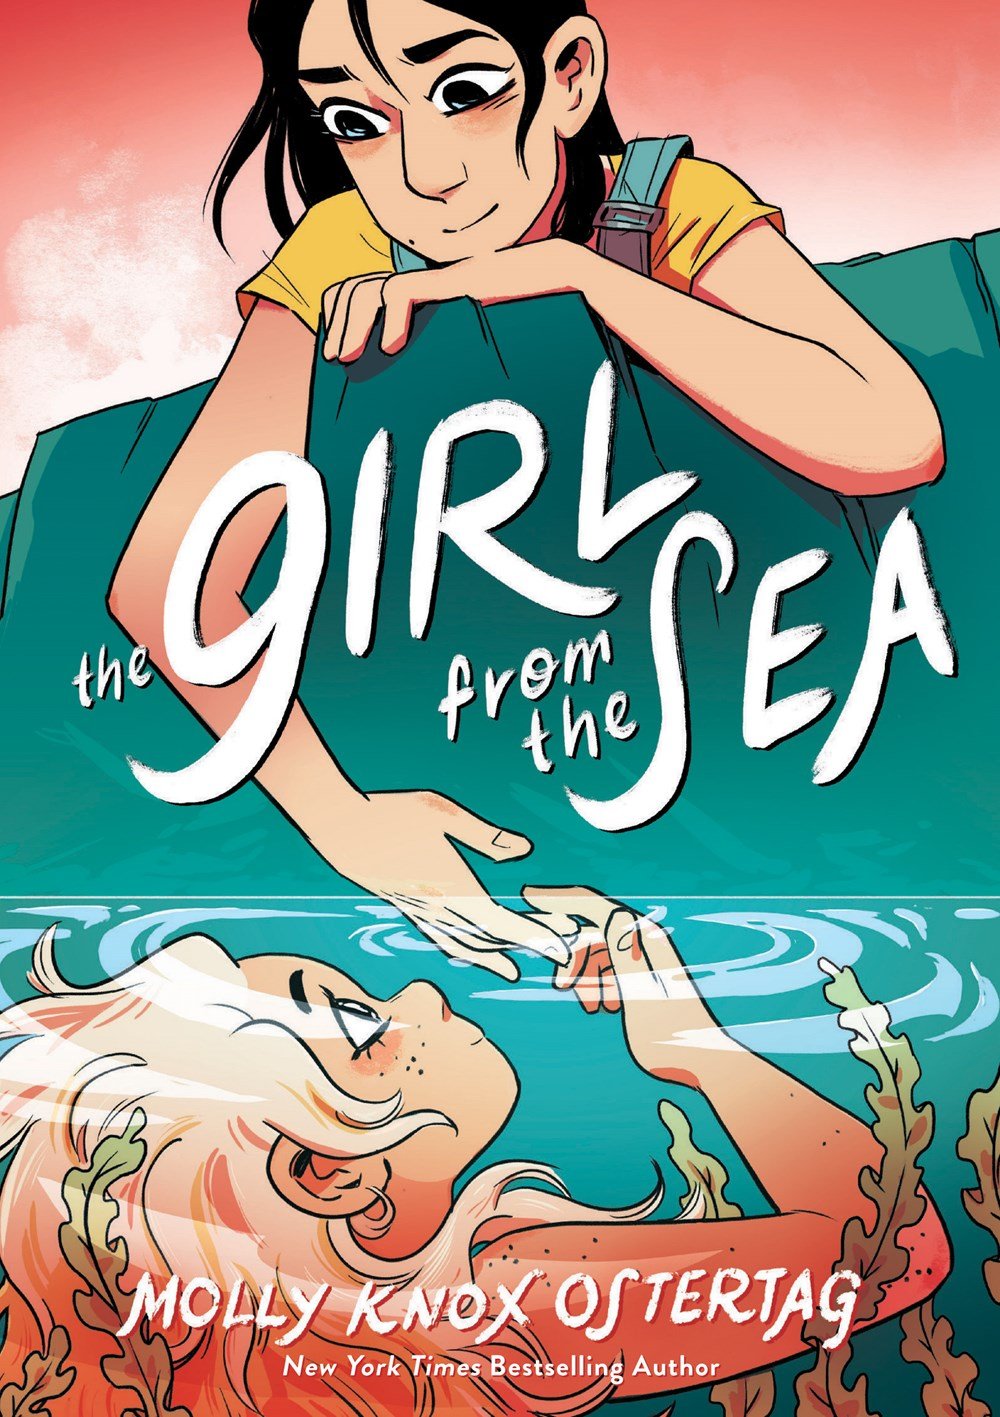 The Girl from the Sea: A Graphic Novel by Molly Knox Ostertag | LGBTQ YA Graphic Novel - Paperbacks & Frybread Co.